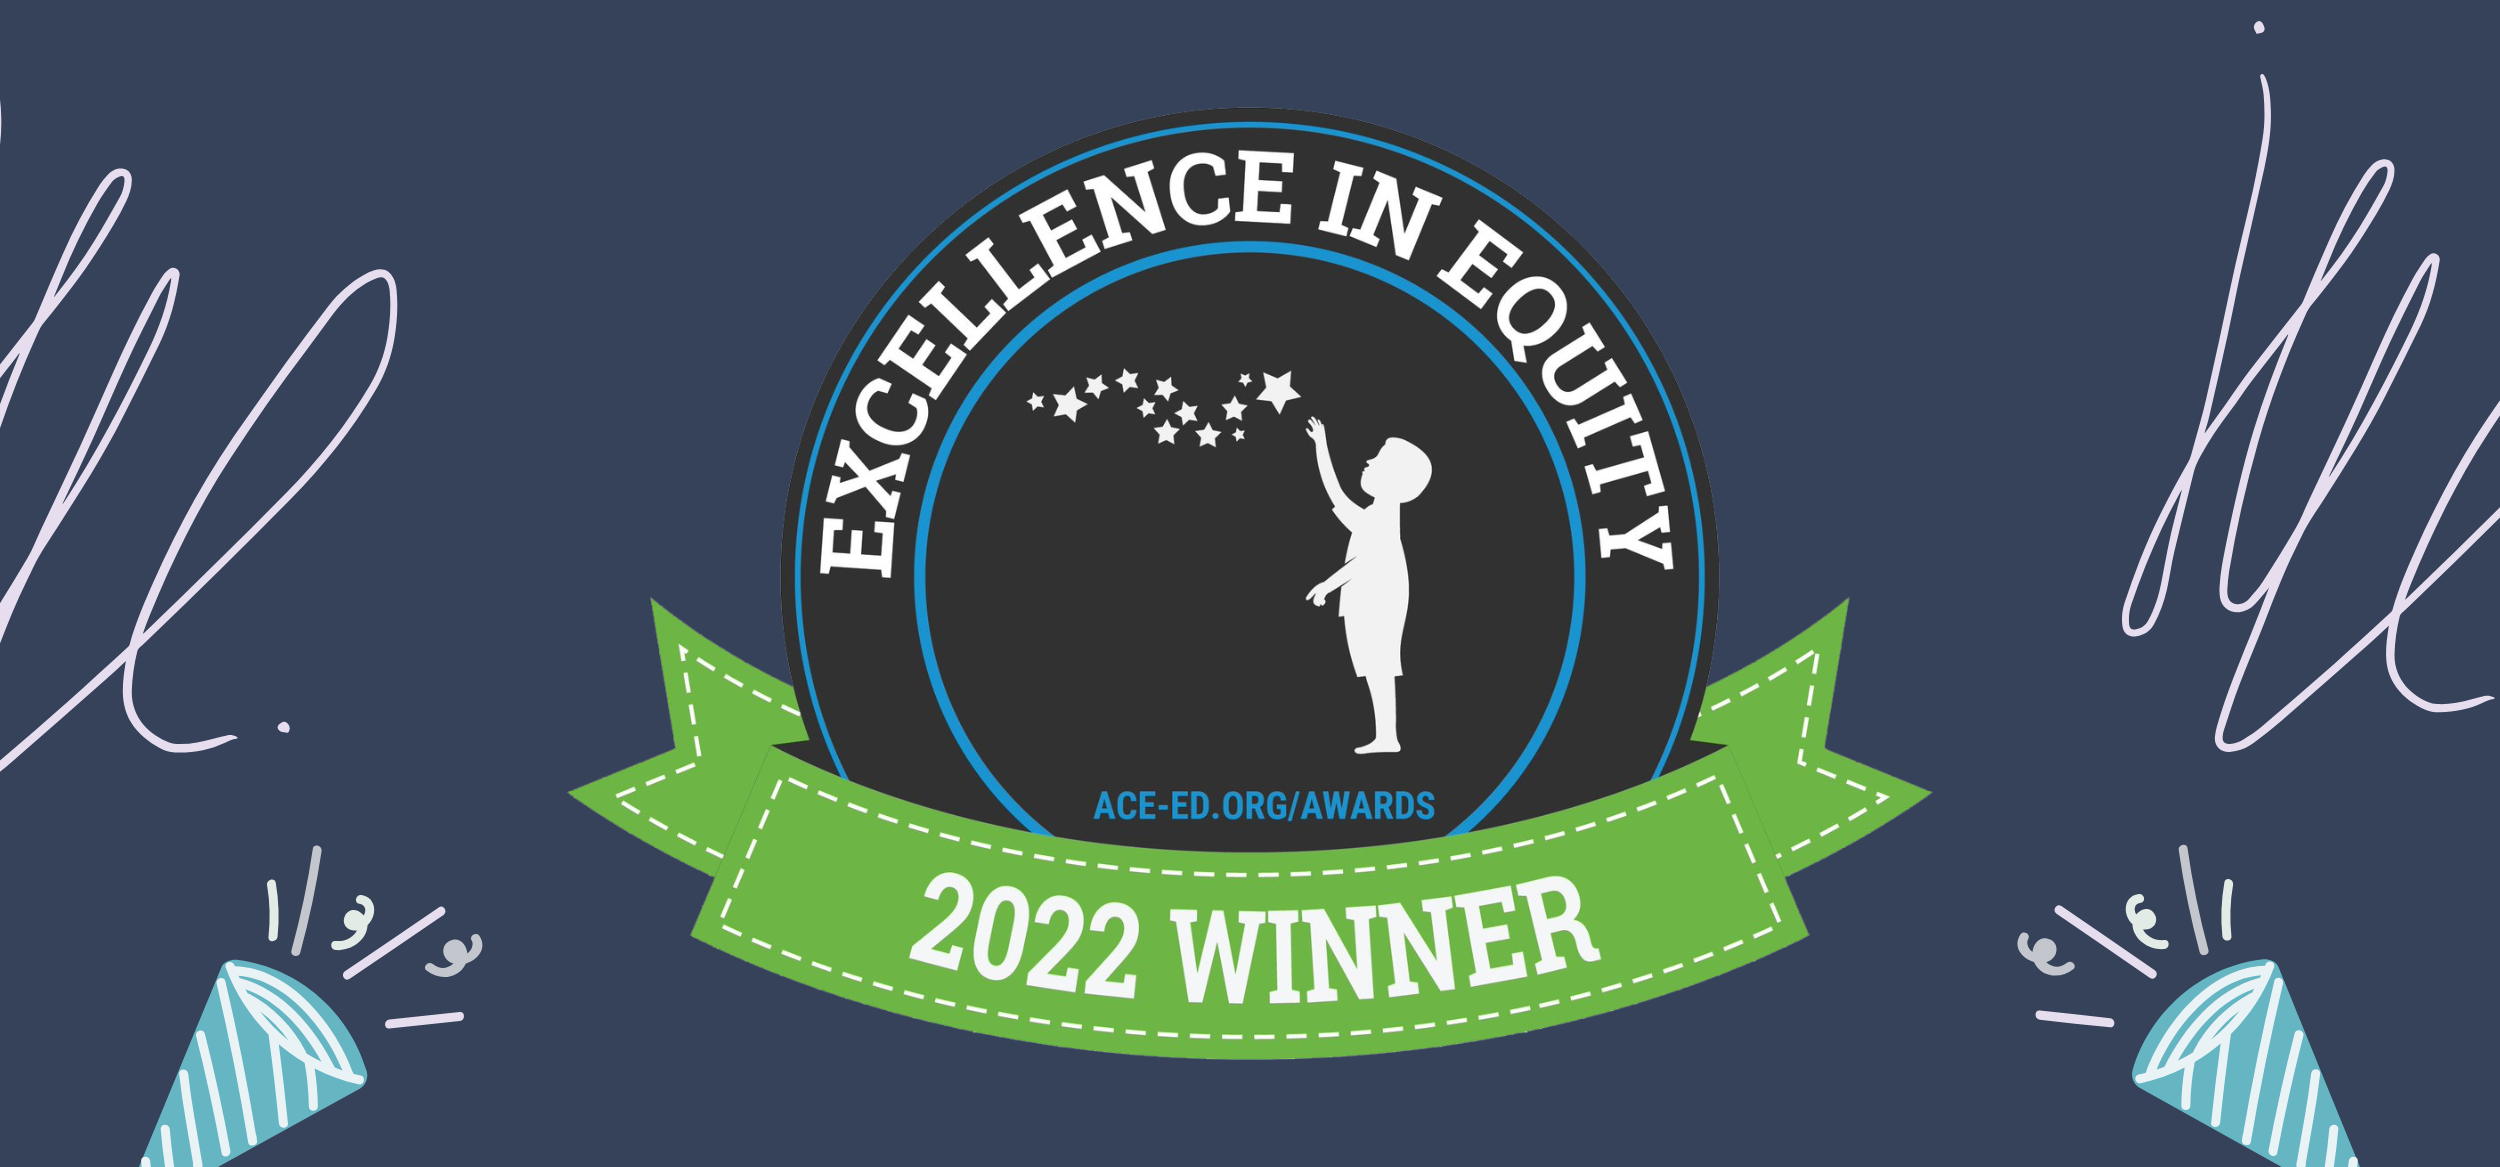 Hāpara honored with 2022 Excellence in Equity Award for outstanding impact during the COVID-19 crisis